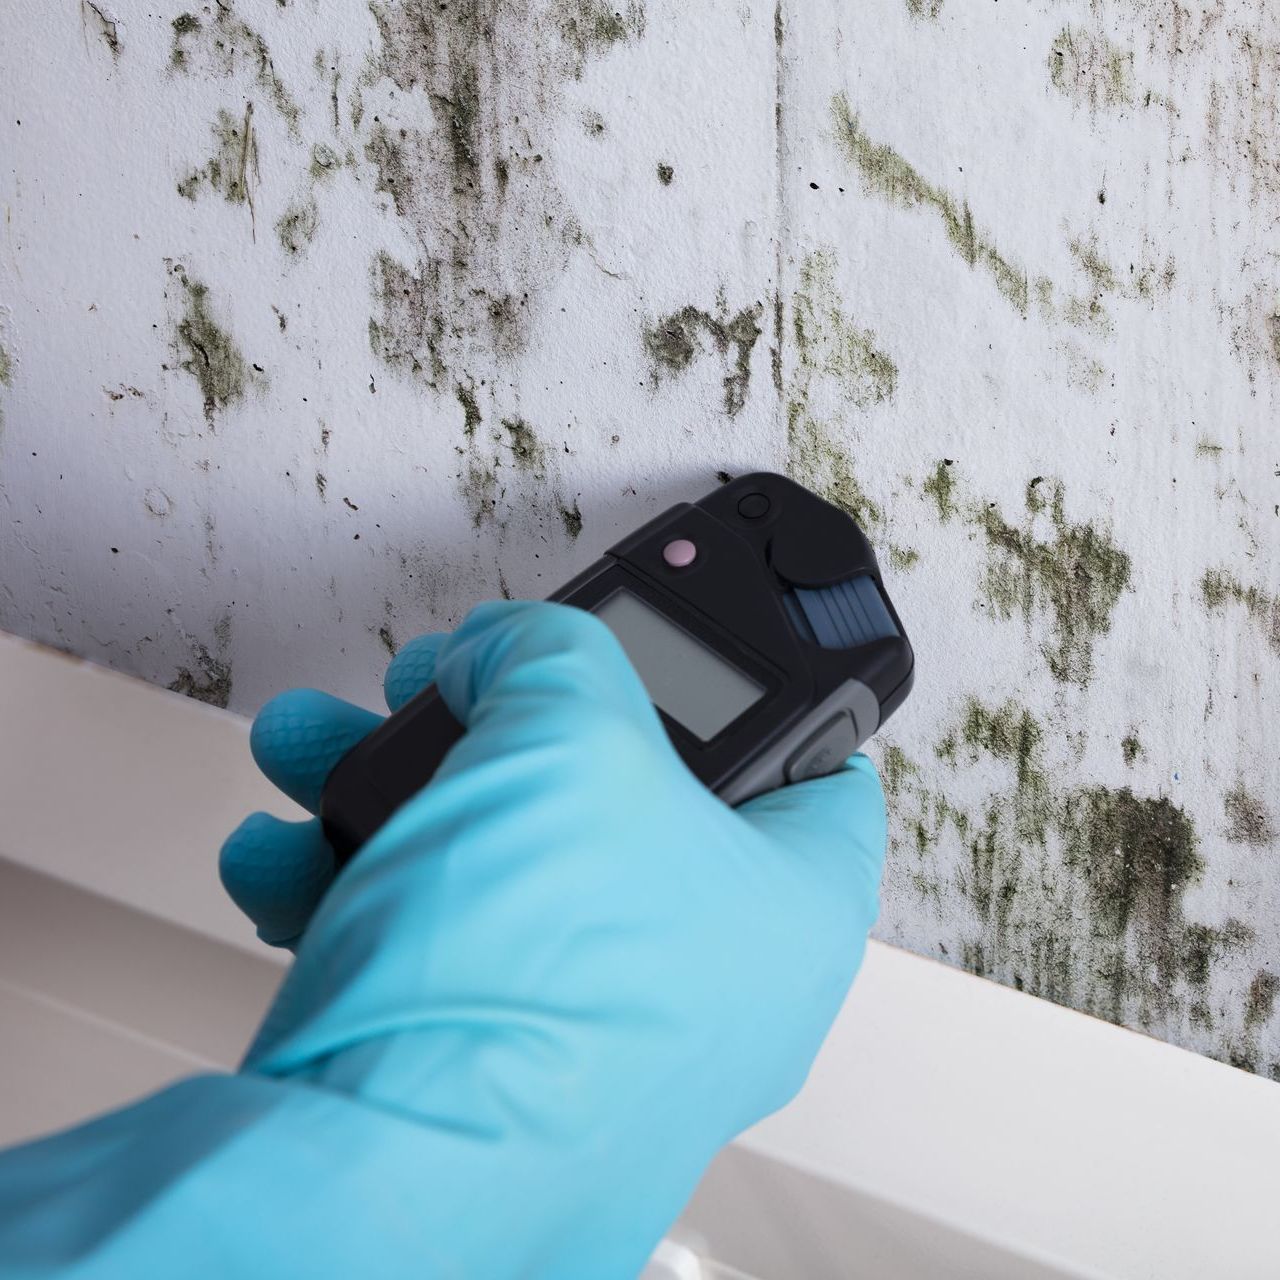 A person wearing blue gloves is holding a device in front of a mouldy wall